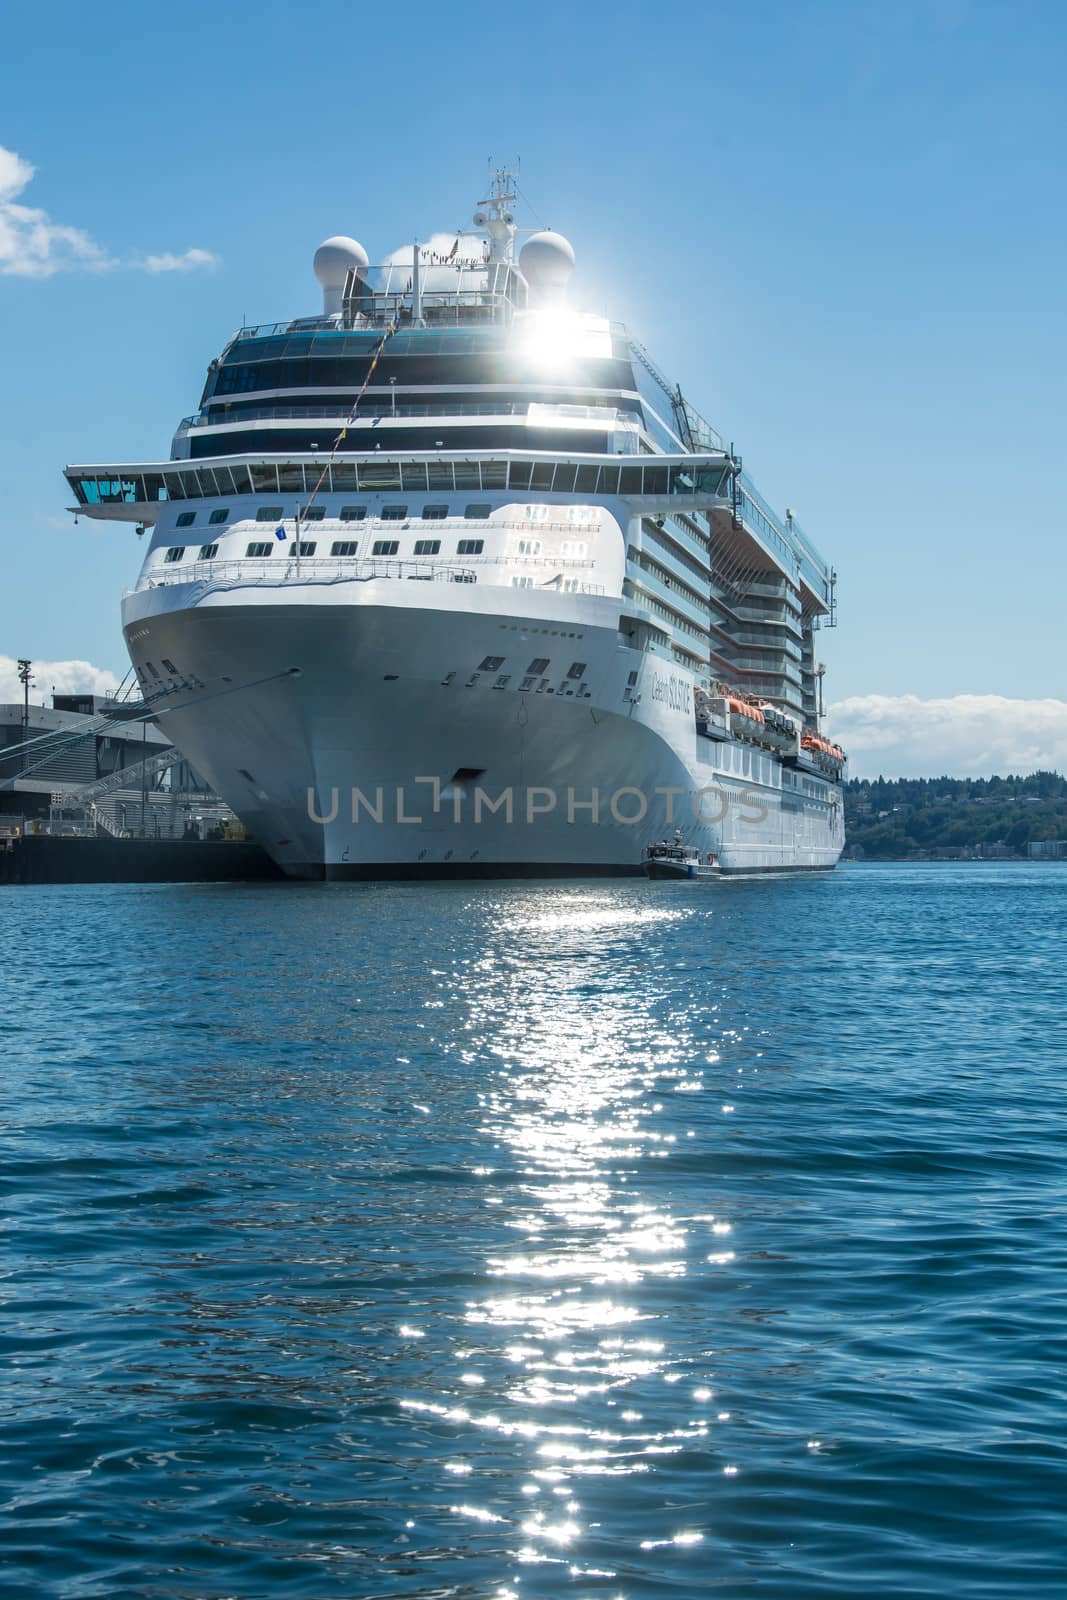 Cruise ship in port, Seattle, WA by cestes001